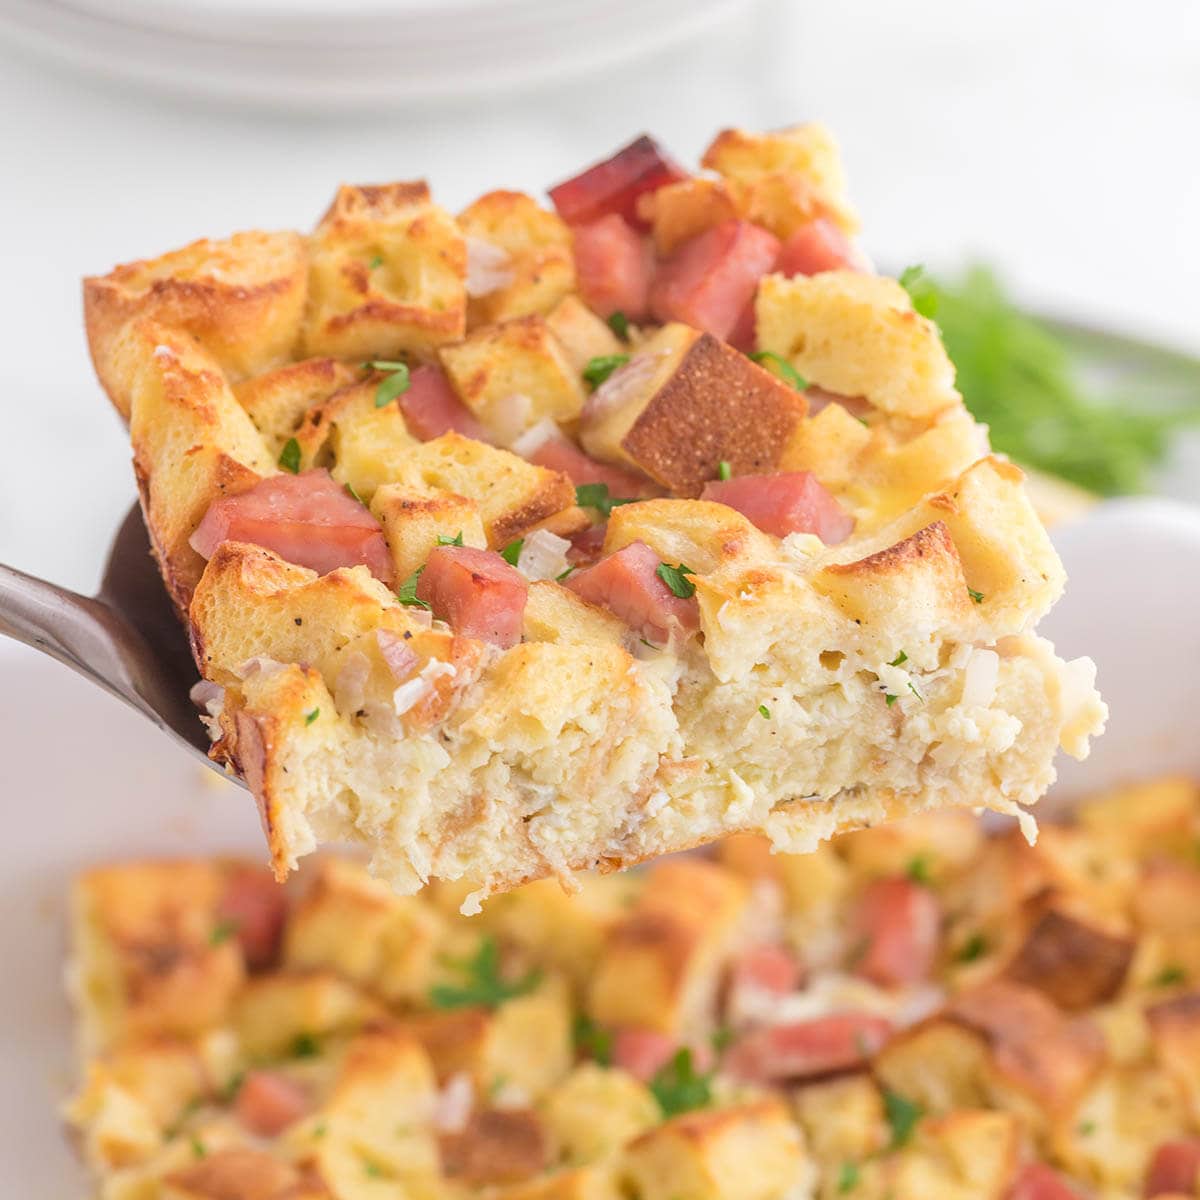 Eggs Benedict Casserole with serving spoon.